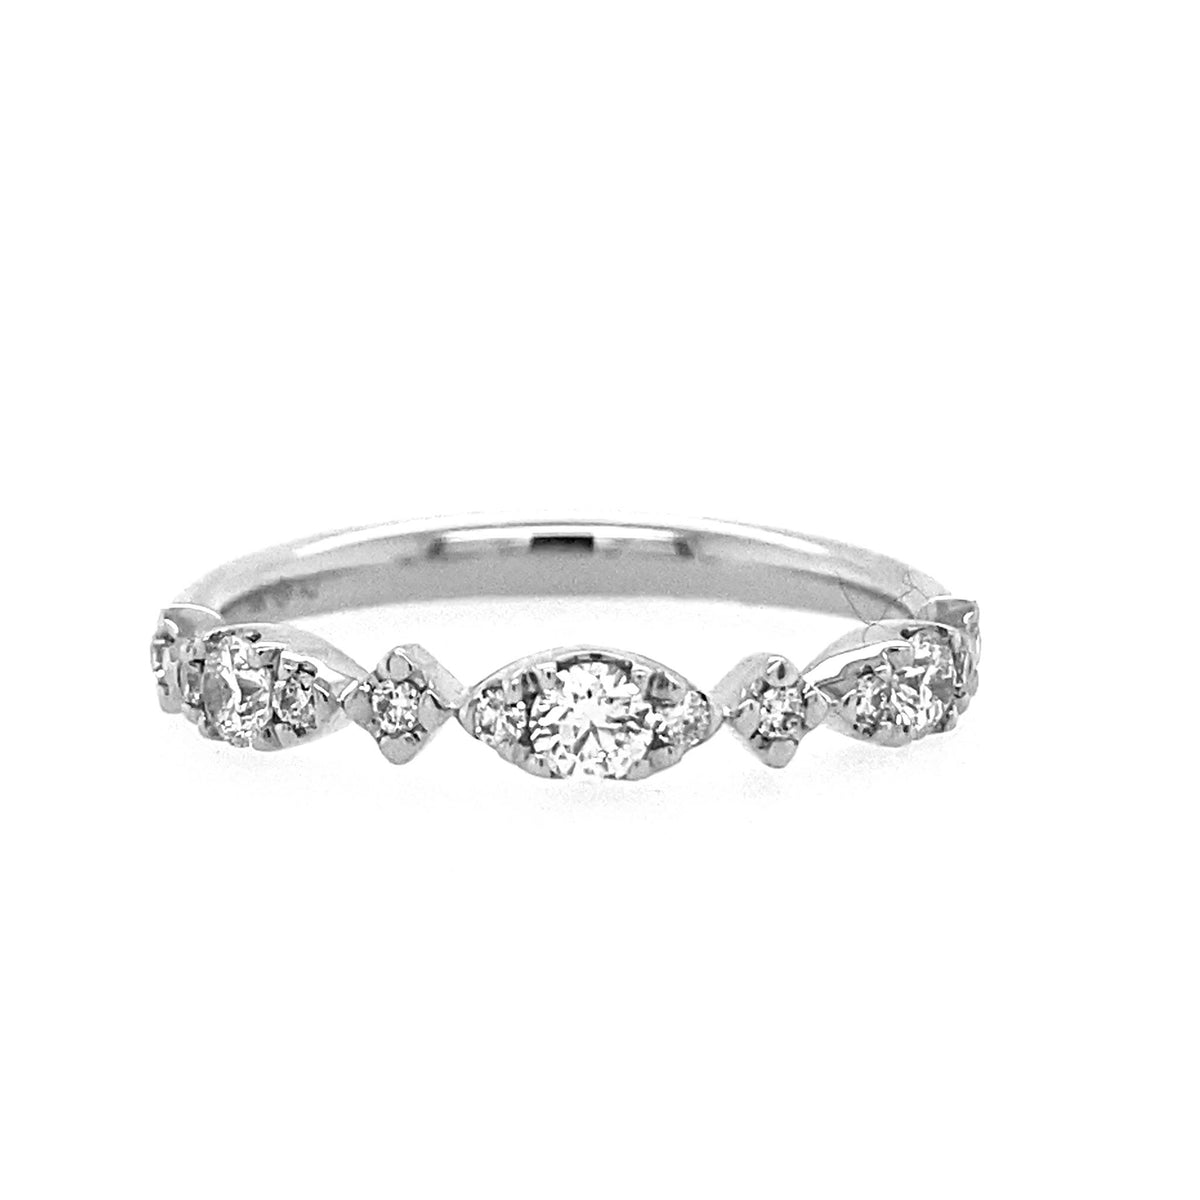 14Kt White Gold Stackable Wedding Ring With 0.33cttw Natural Diamonds